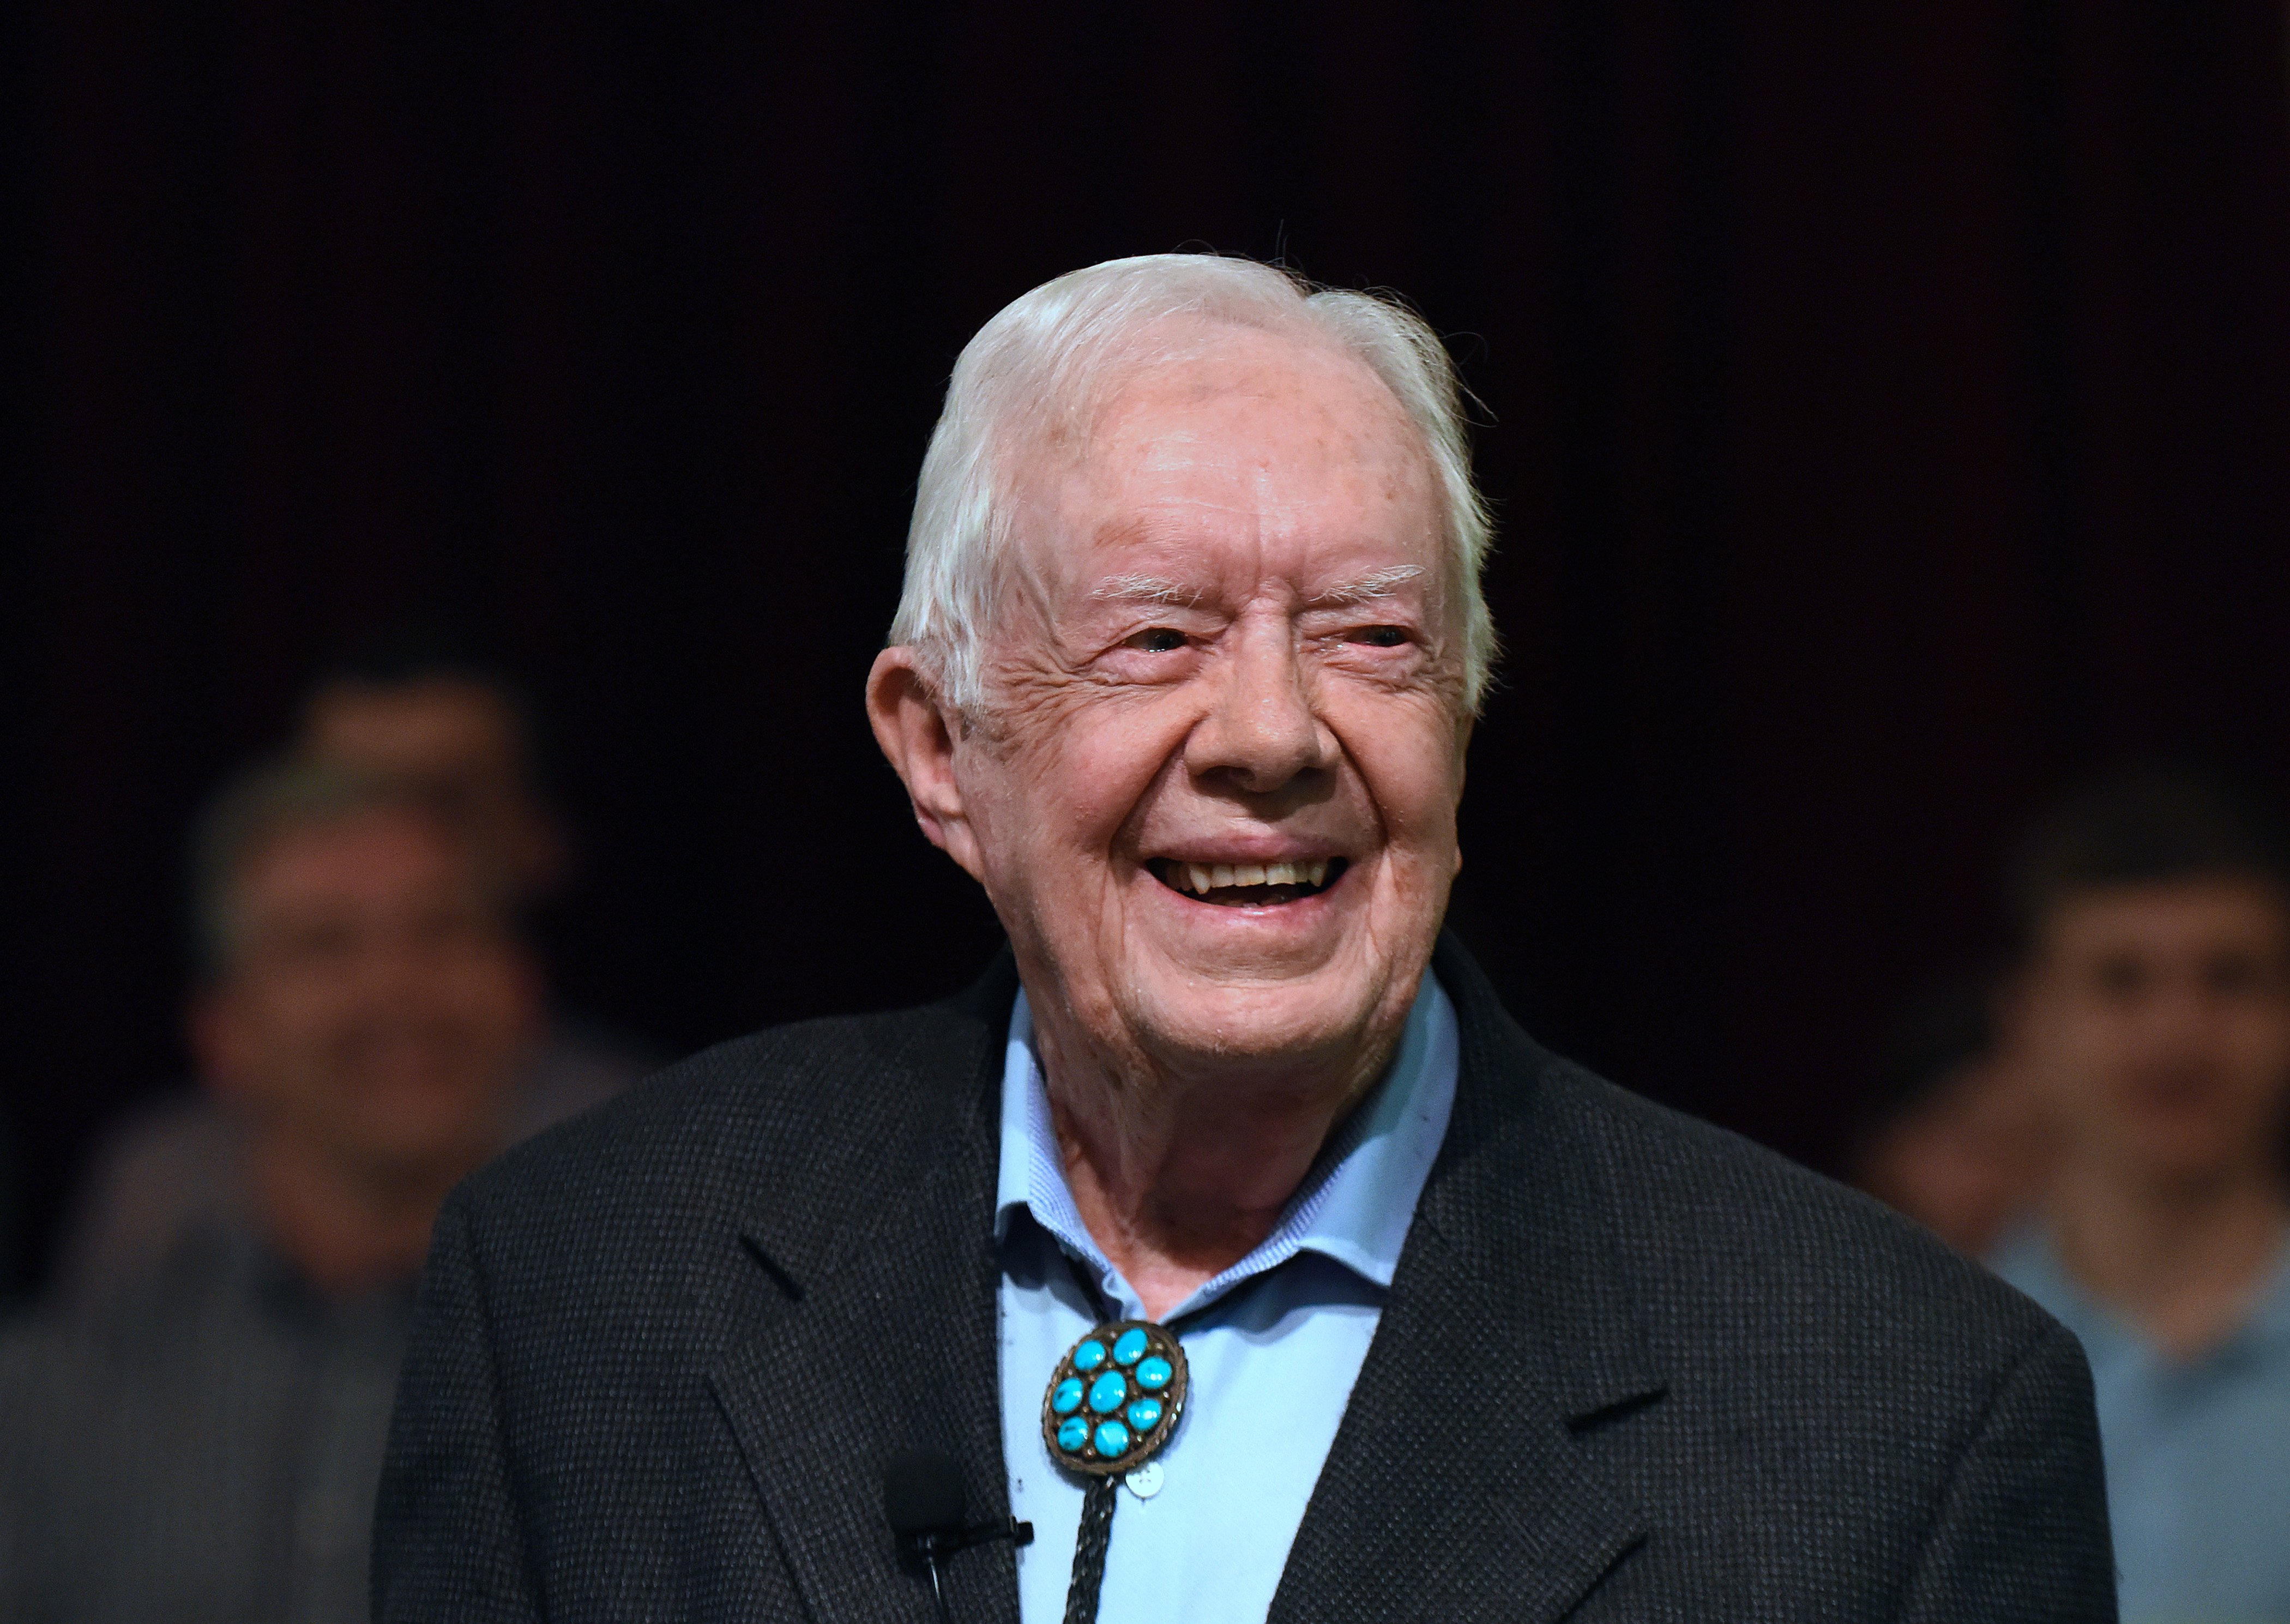 Former U.S. President Jimmy Carter speaks to the congregation at Maranatha Baptist Church before teaching Sunday school in his hometown of Plains, Georgia on April 28, 2019. | Source: Getty Images